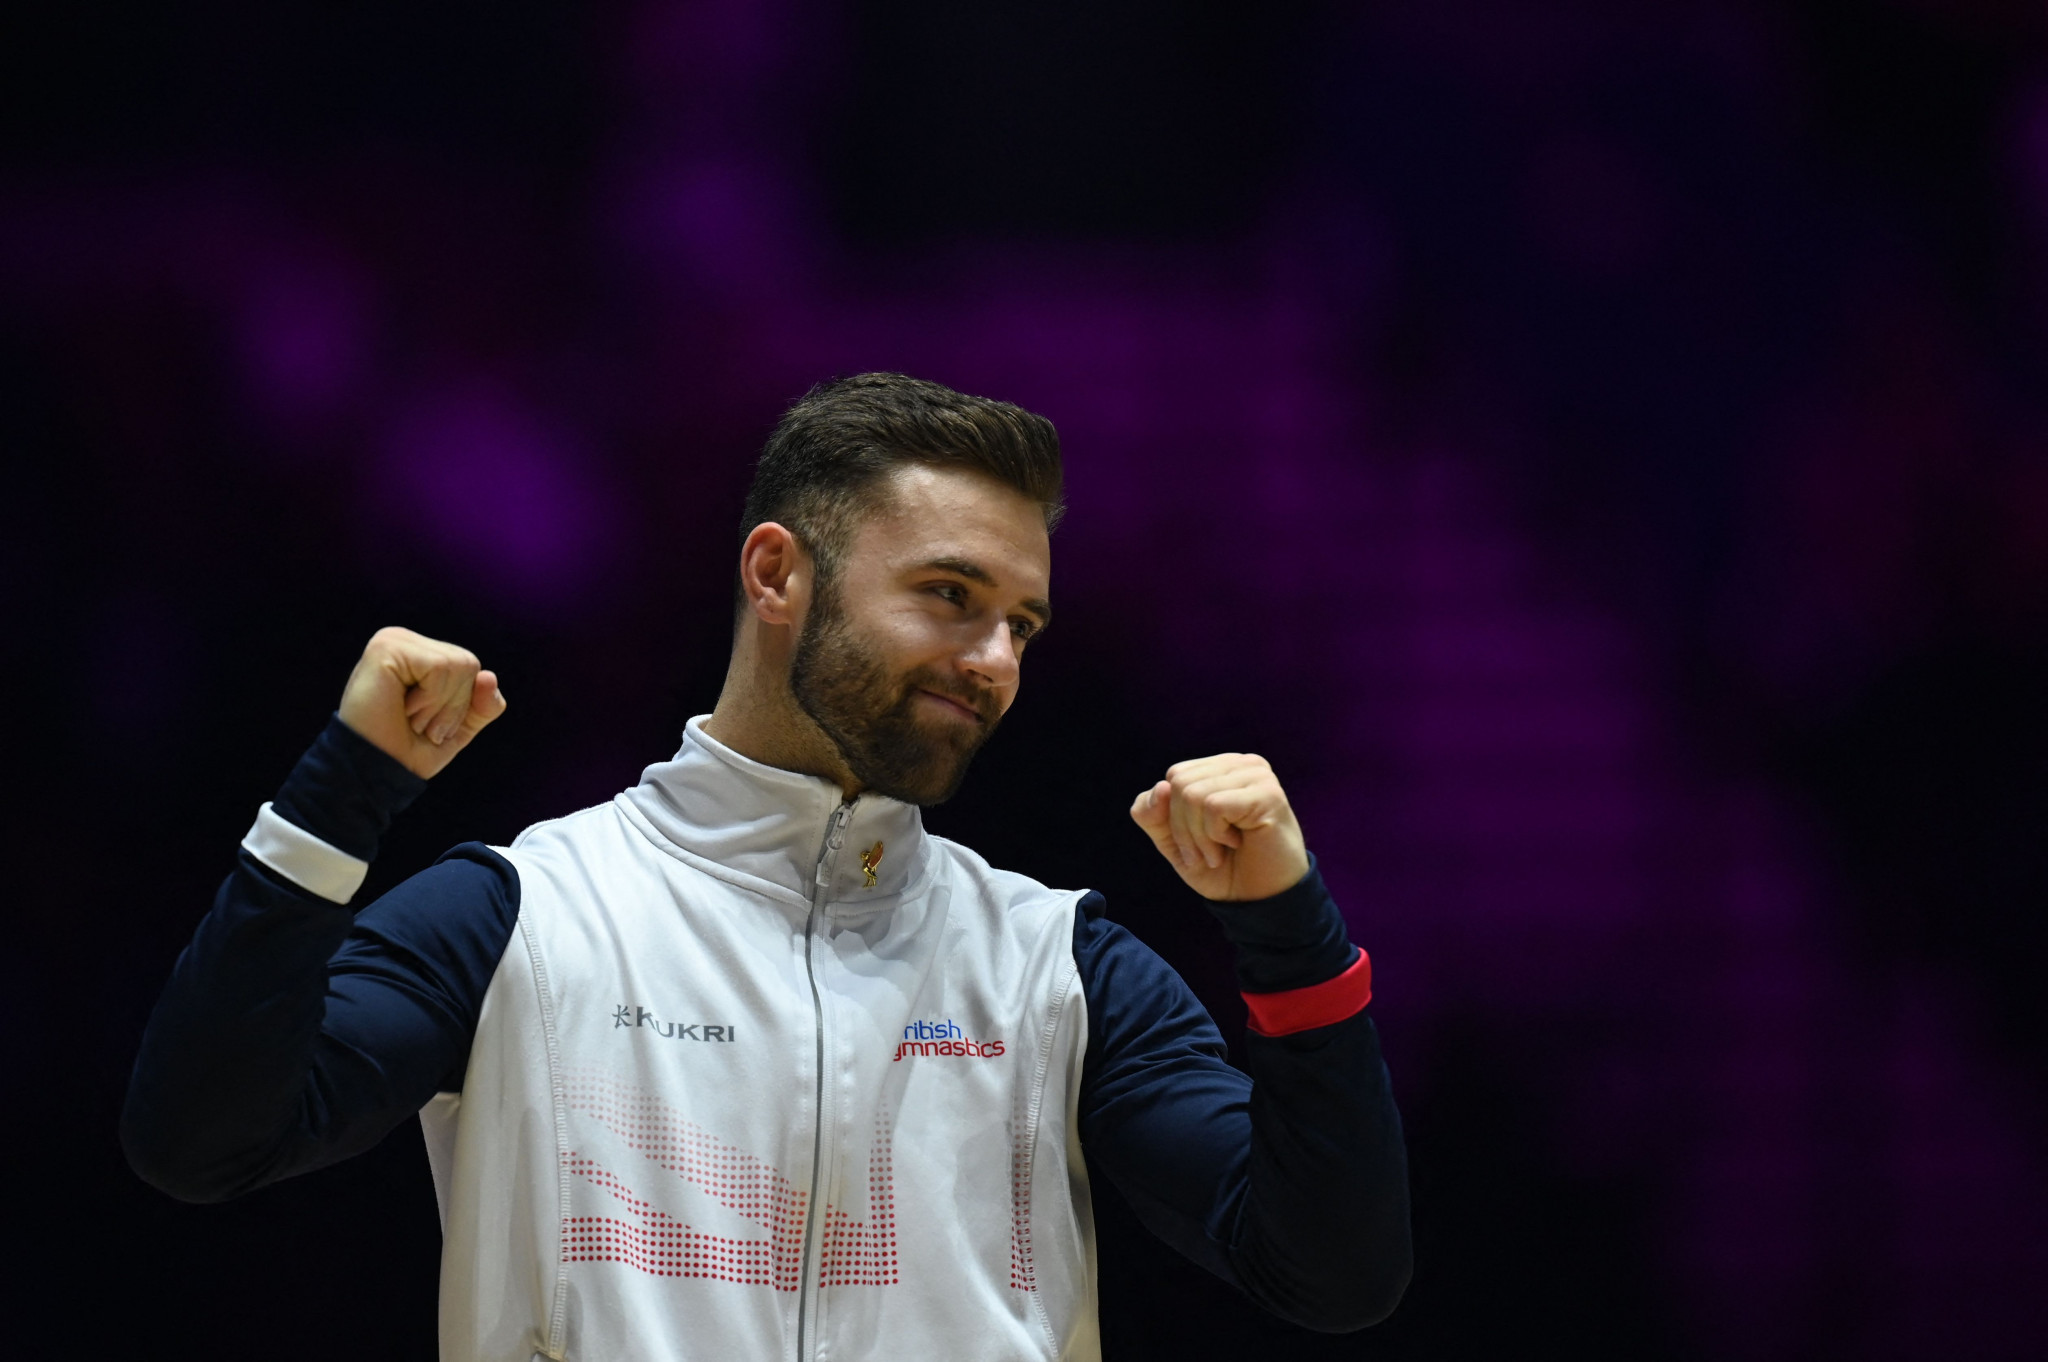 Giarnni Regini-Moran was Britain's only gold medallist today at the Artistic Gymnastics World Championships ©Getty Images